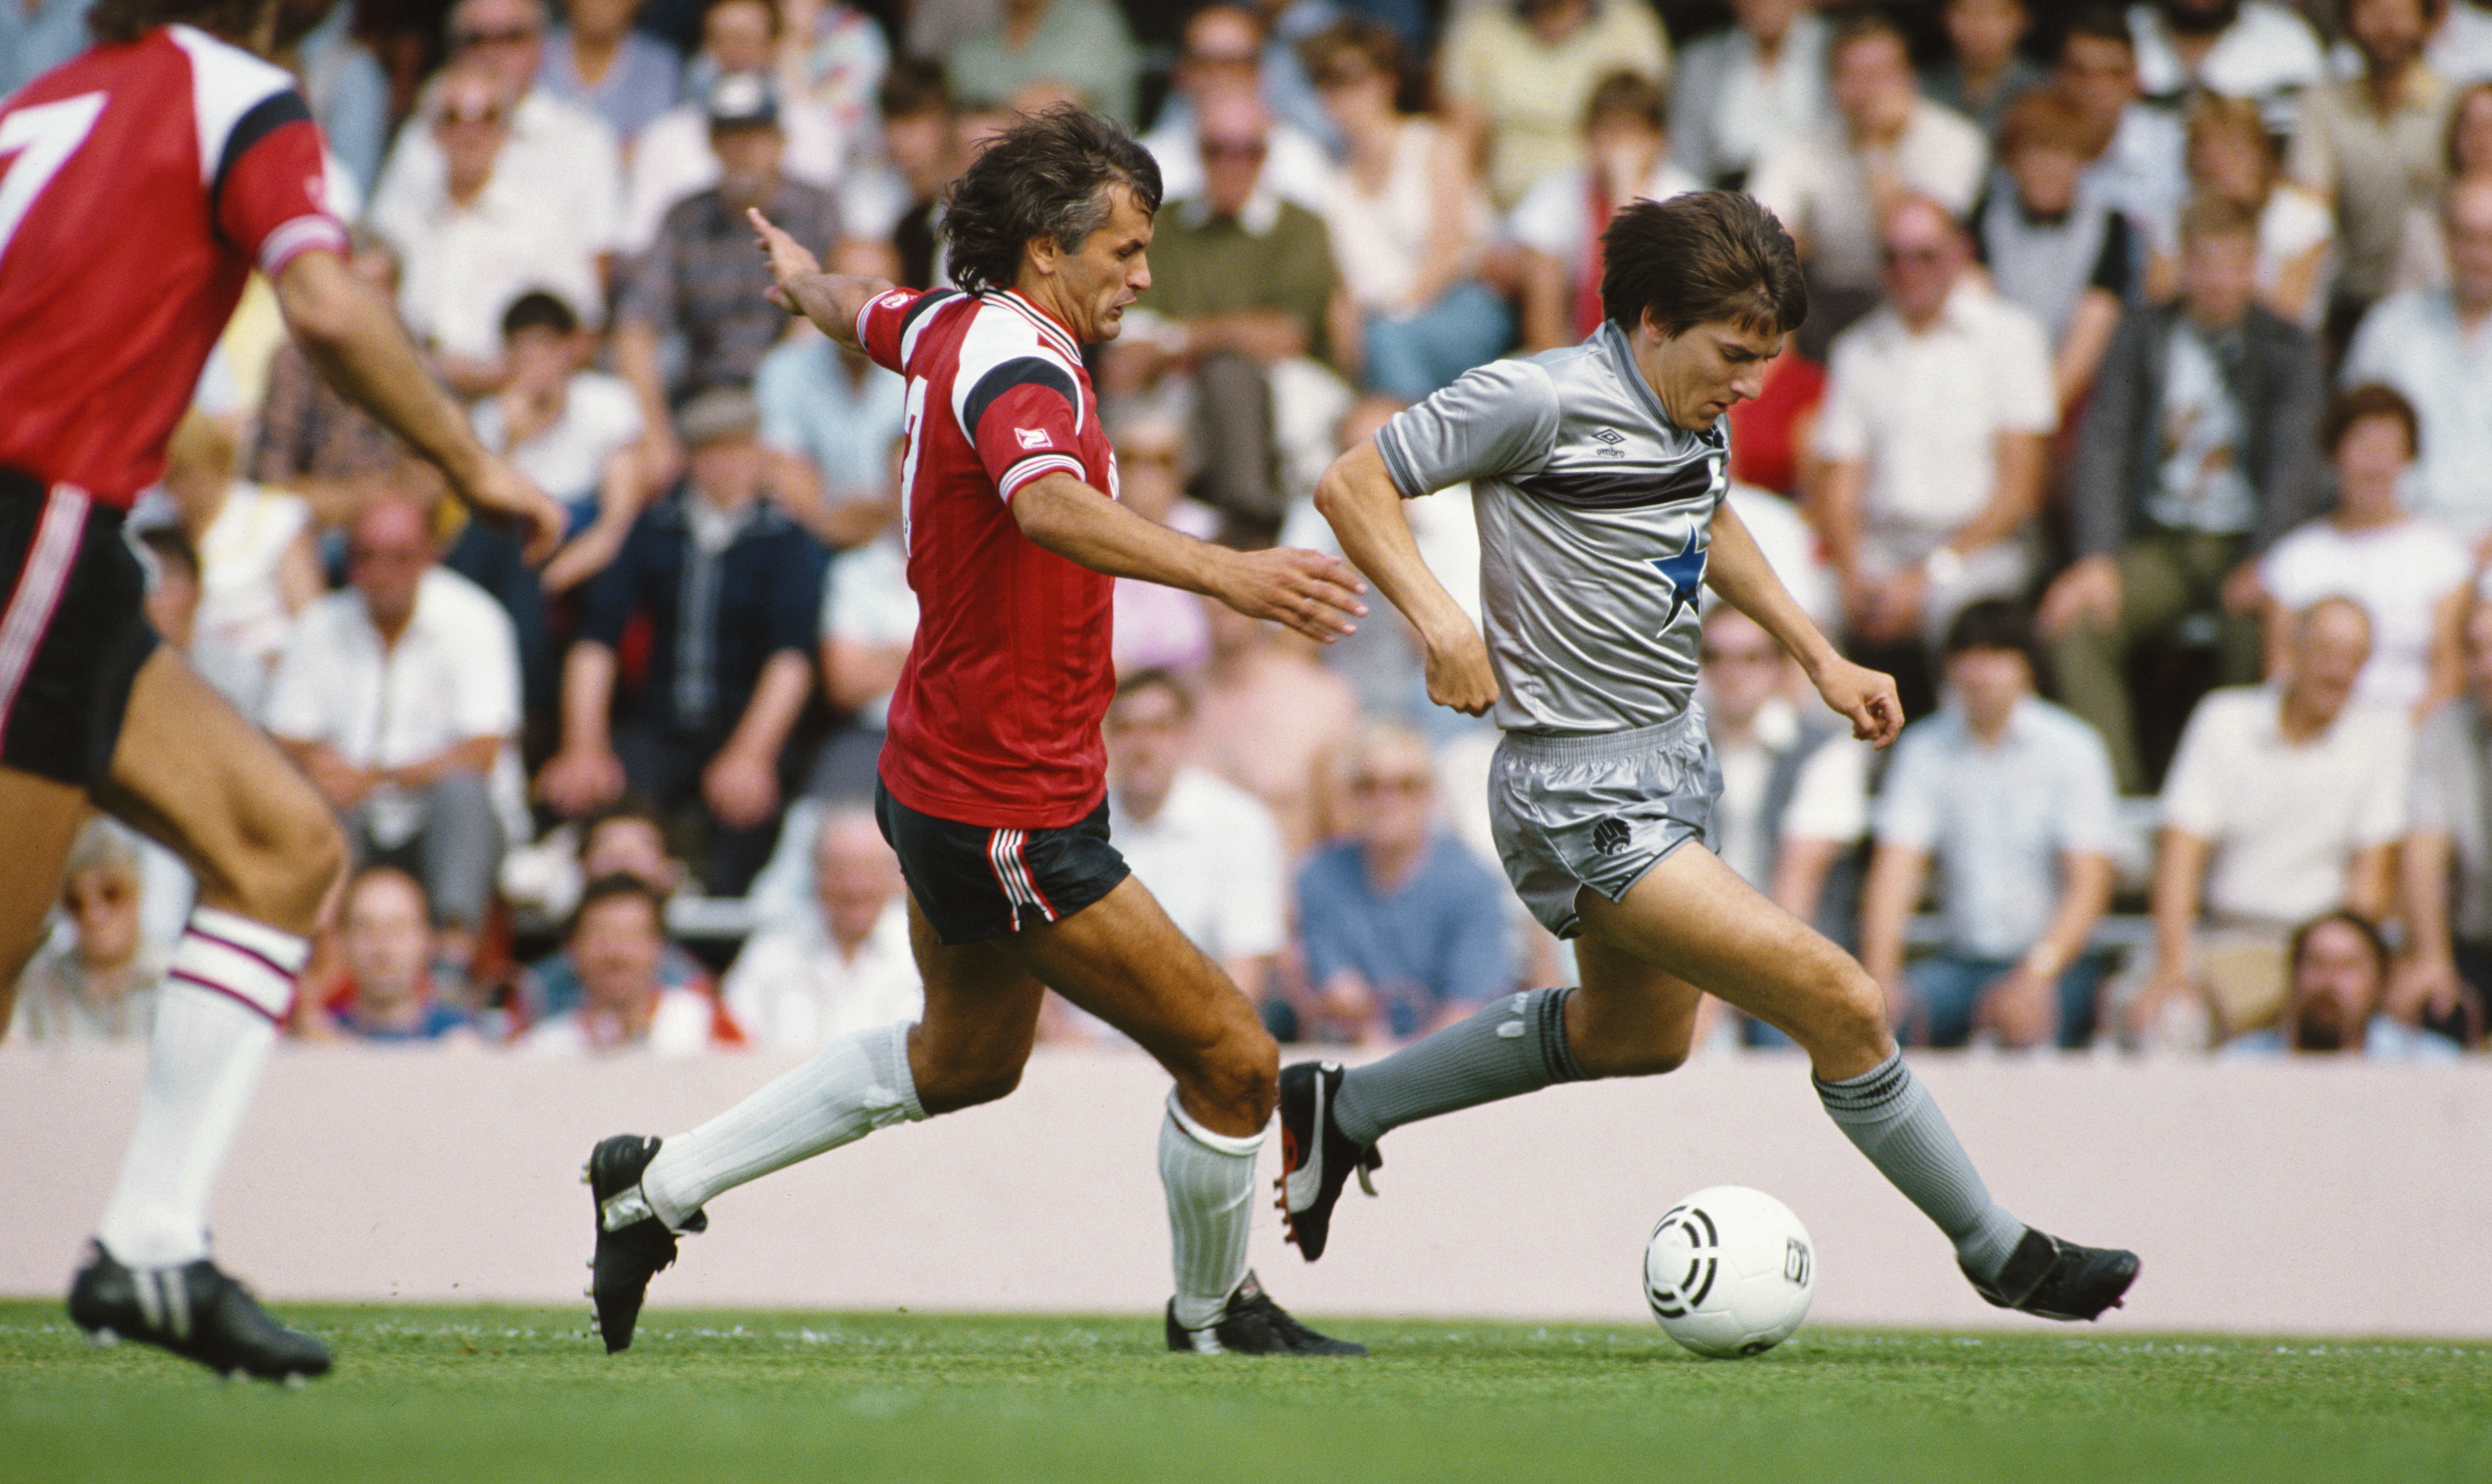 southampton-v-newcastle-united-first-division-1985.jpg